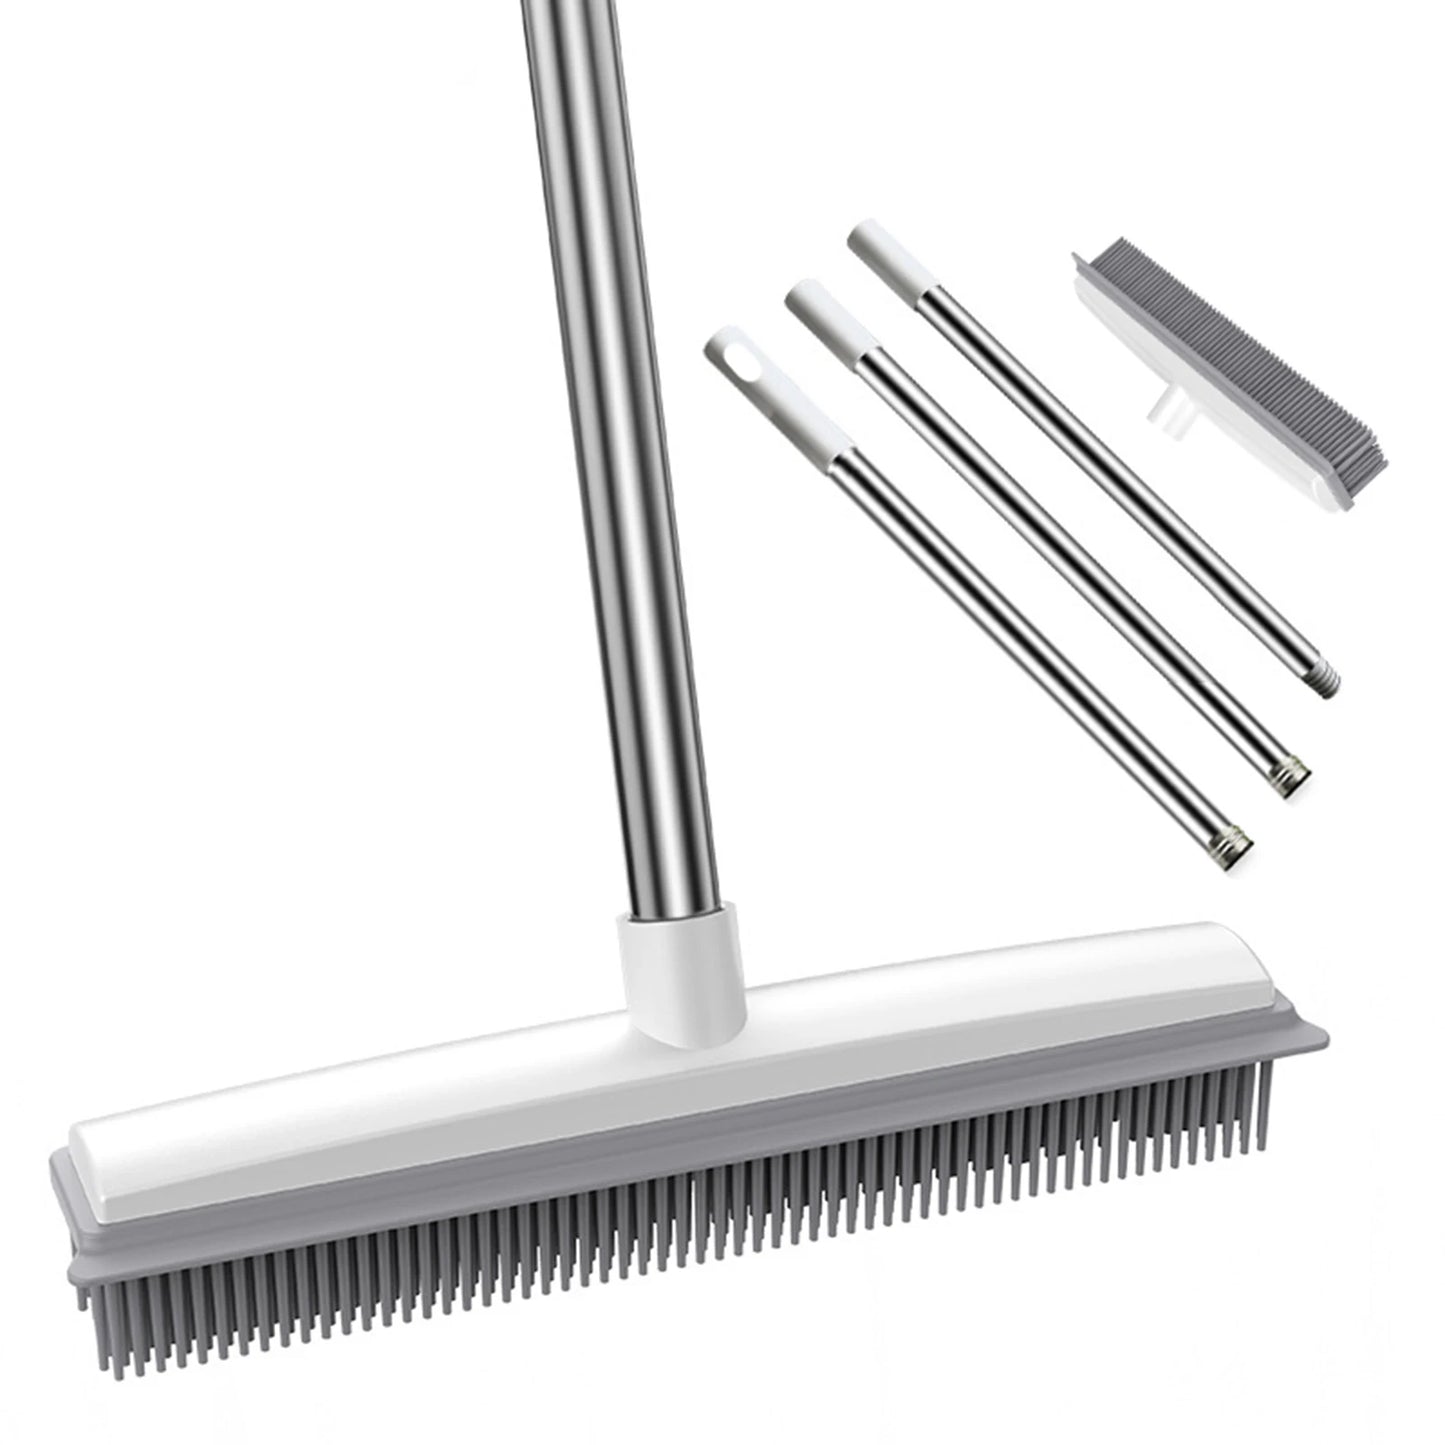 12" Wide Rubber Broom Carpet Rake with Squeegee